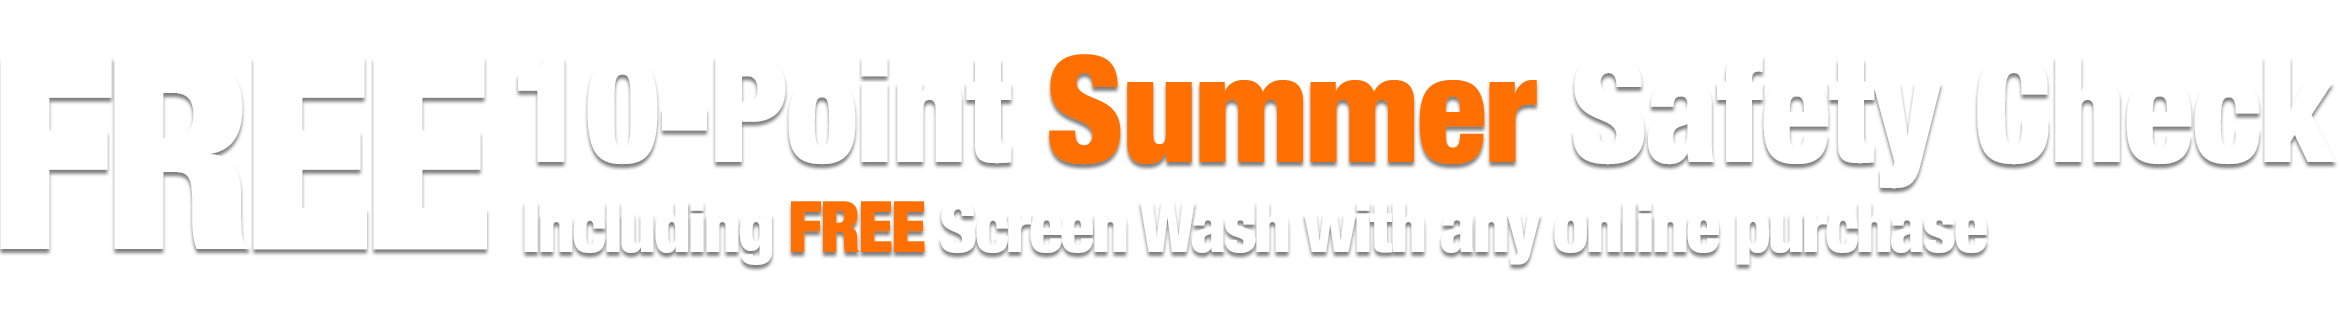 Free 10-Point Spring Safety Check including FREE Screen Wash with any online order